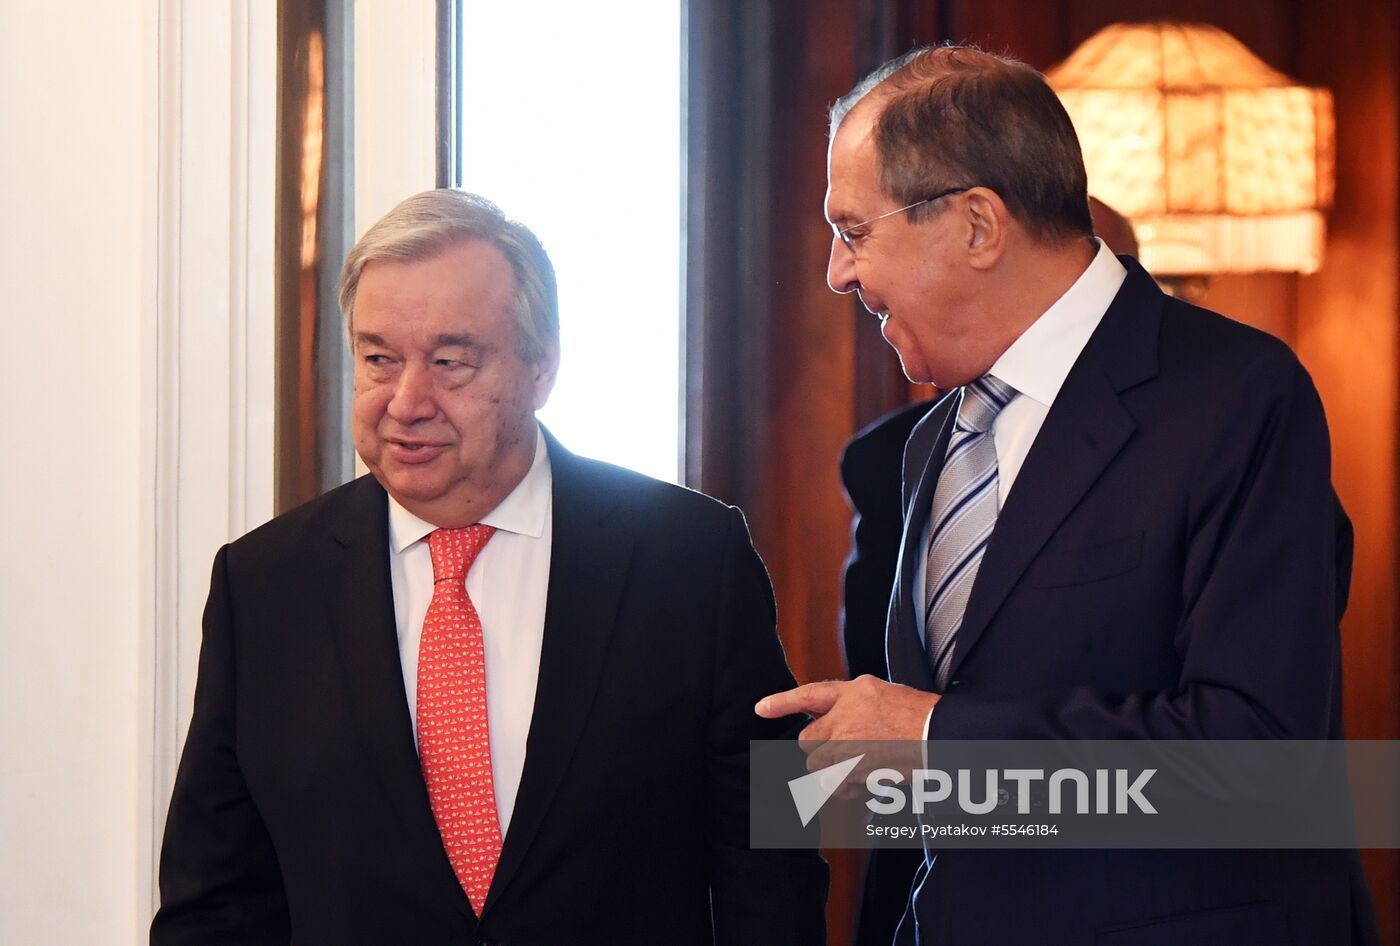 Russian Foreign Minister Sergei Lavrov meets with UN Secretary-General Antonio Guterres